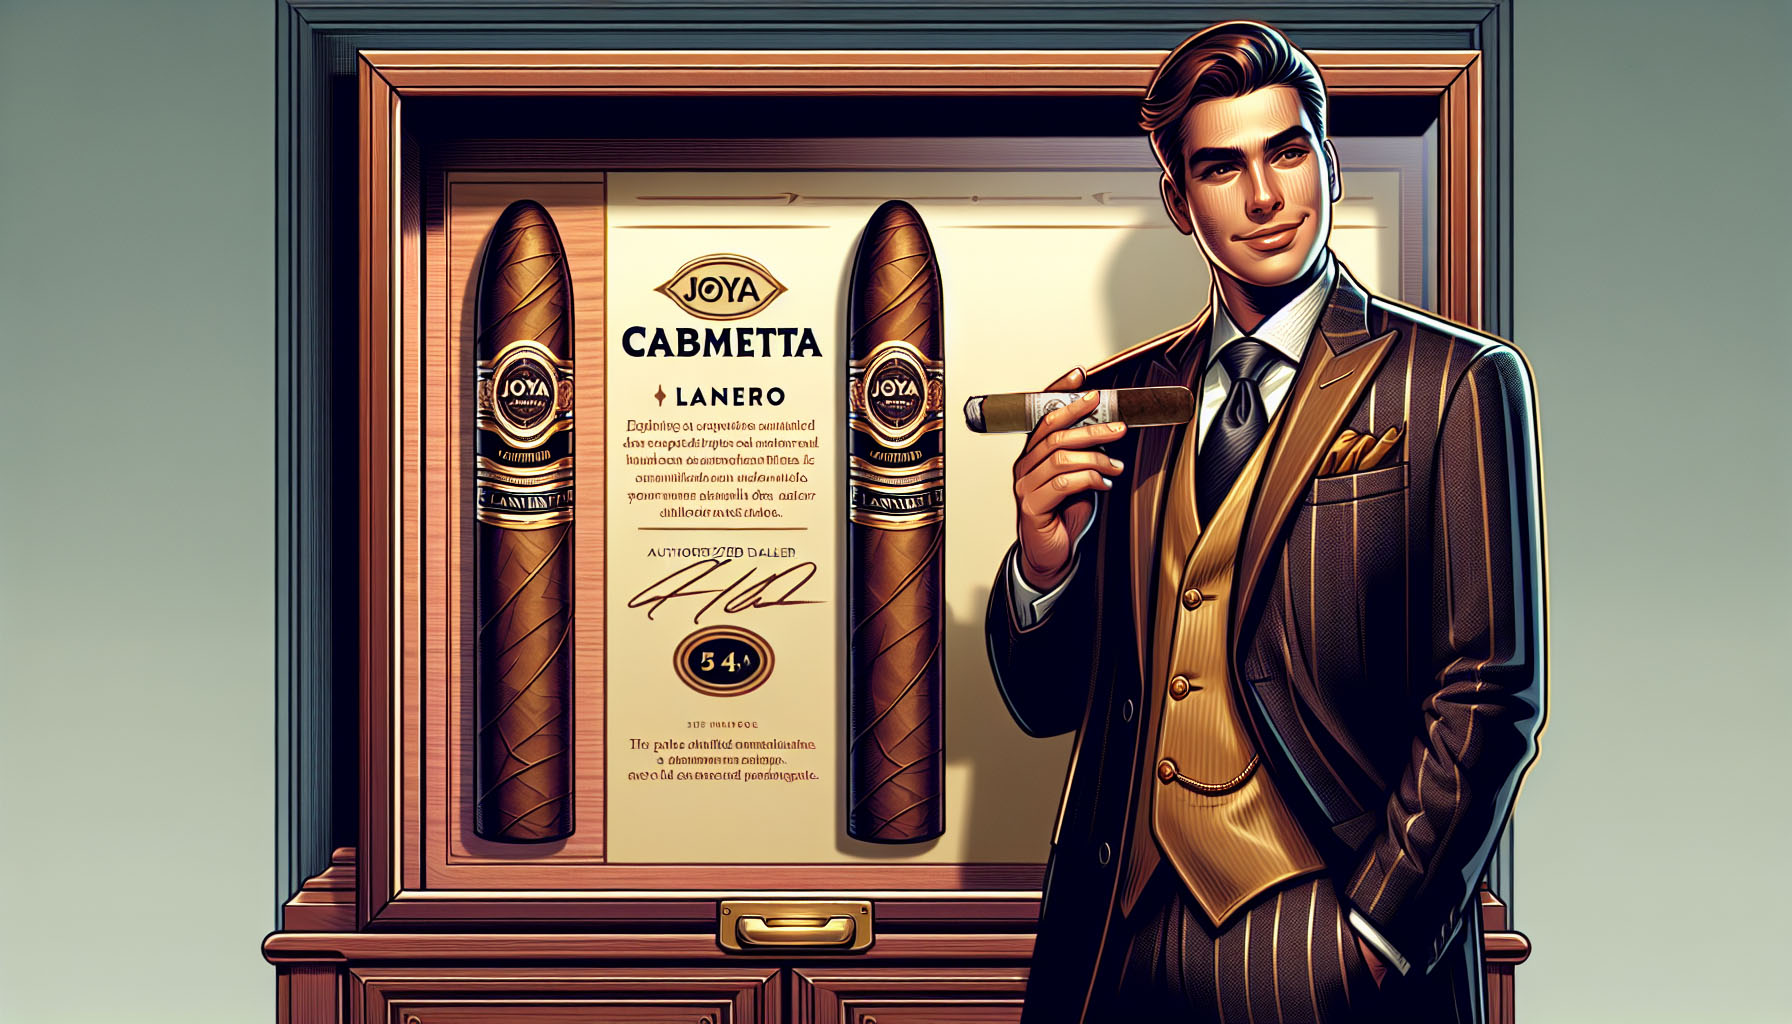 An authorized dealer showcasing the exclusive Cabinetta Lancero